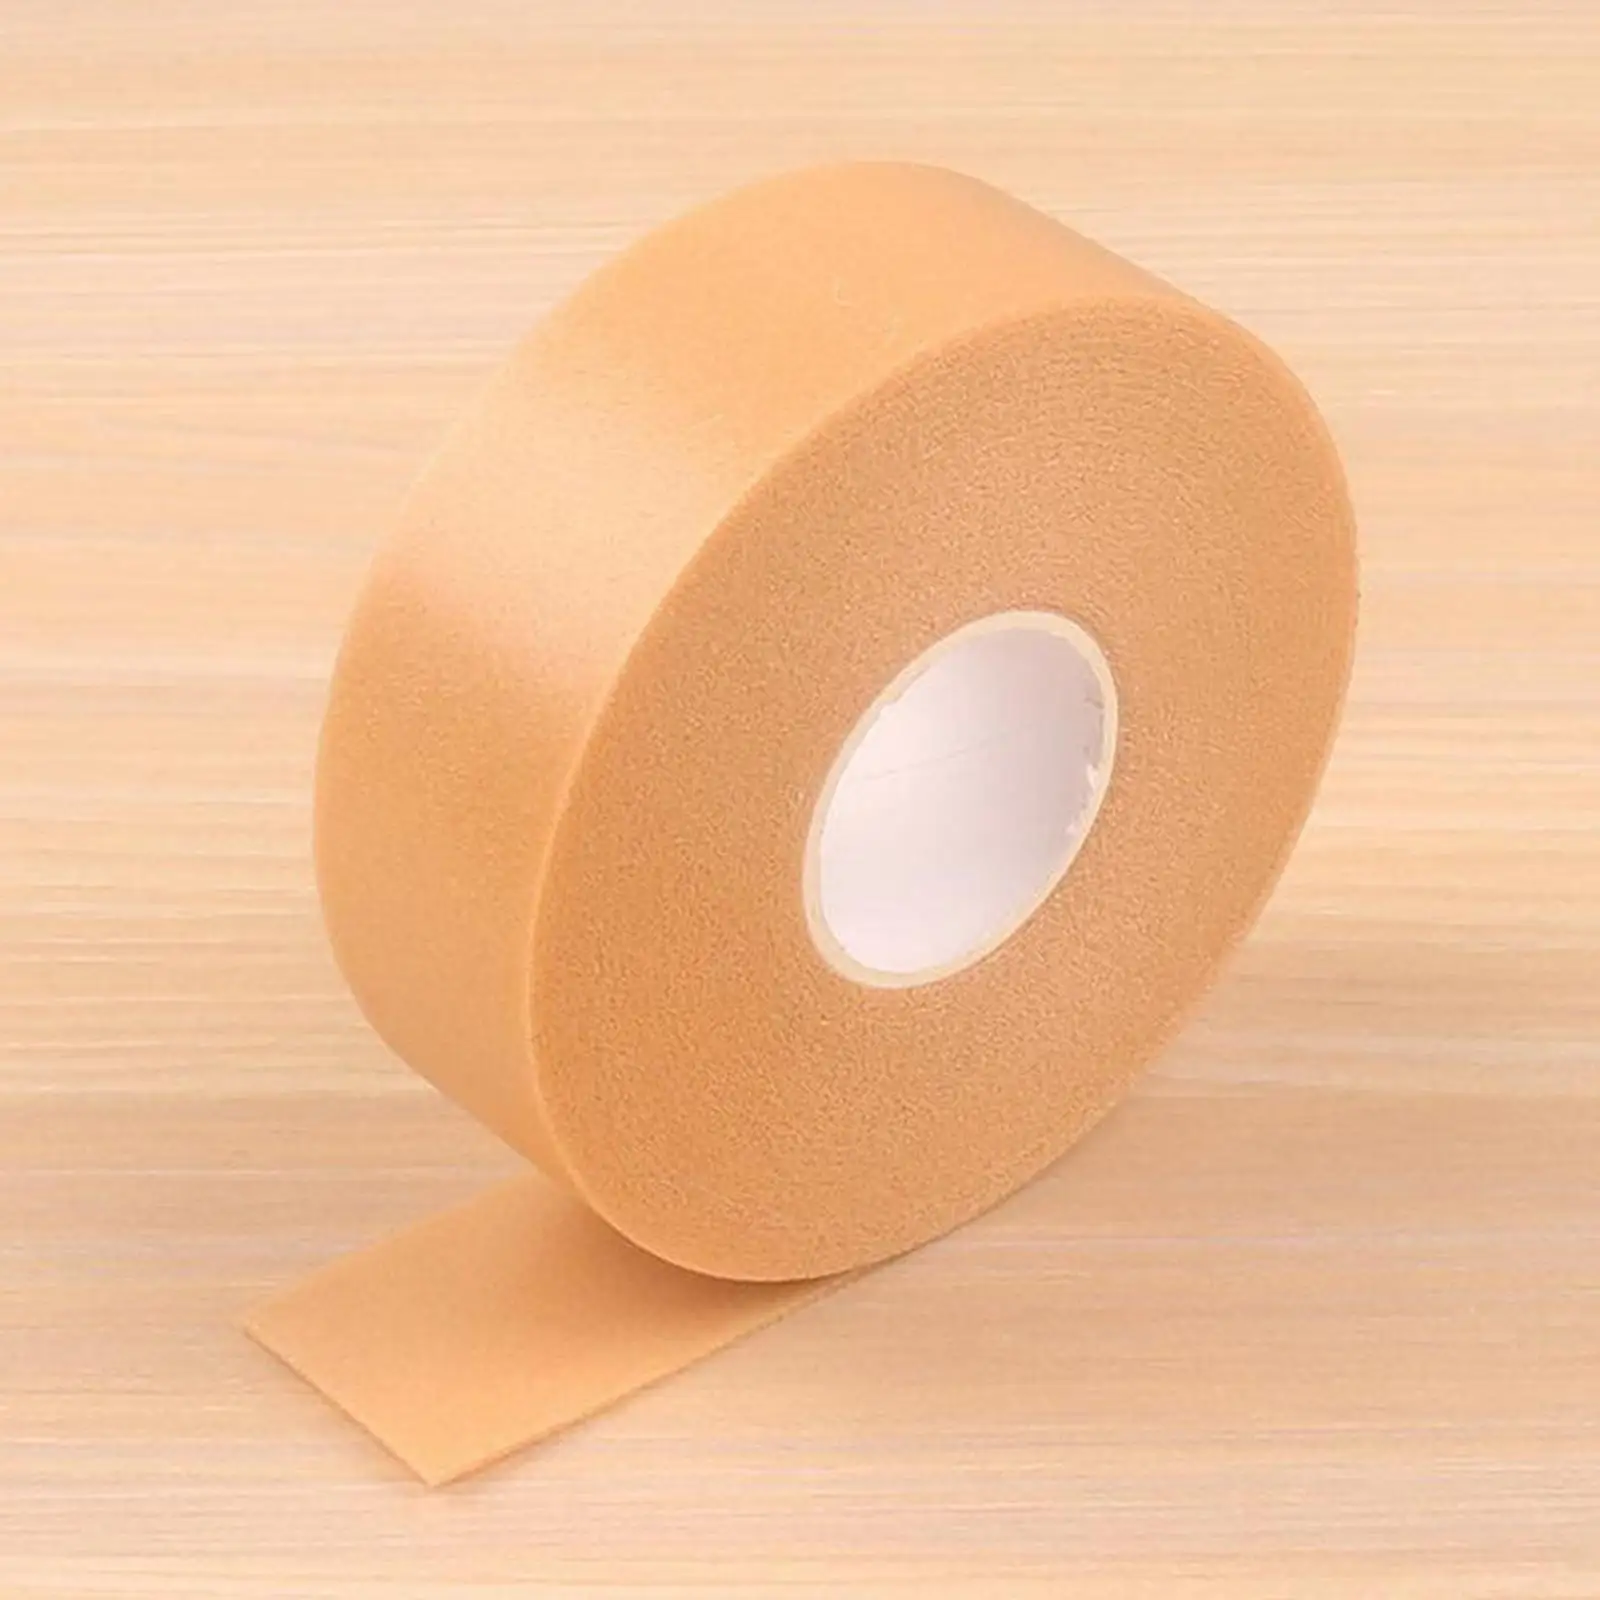 Invisible Waterproof Foam Blister Tape Anti-Wear Sticker for Where are Easily Rubbed, Such as , Ankles, Fingers On